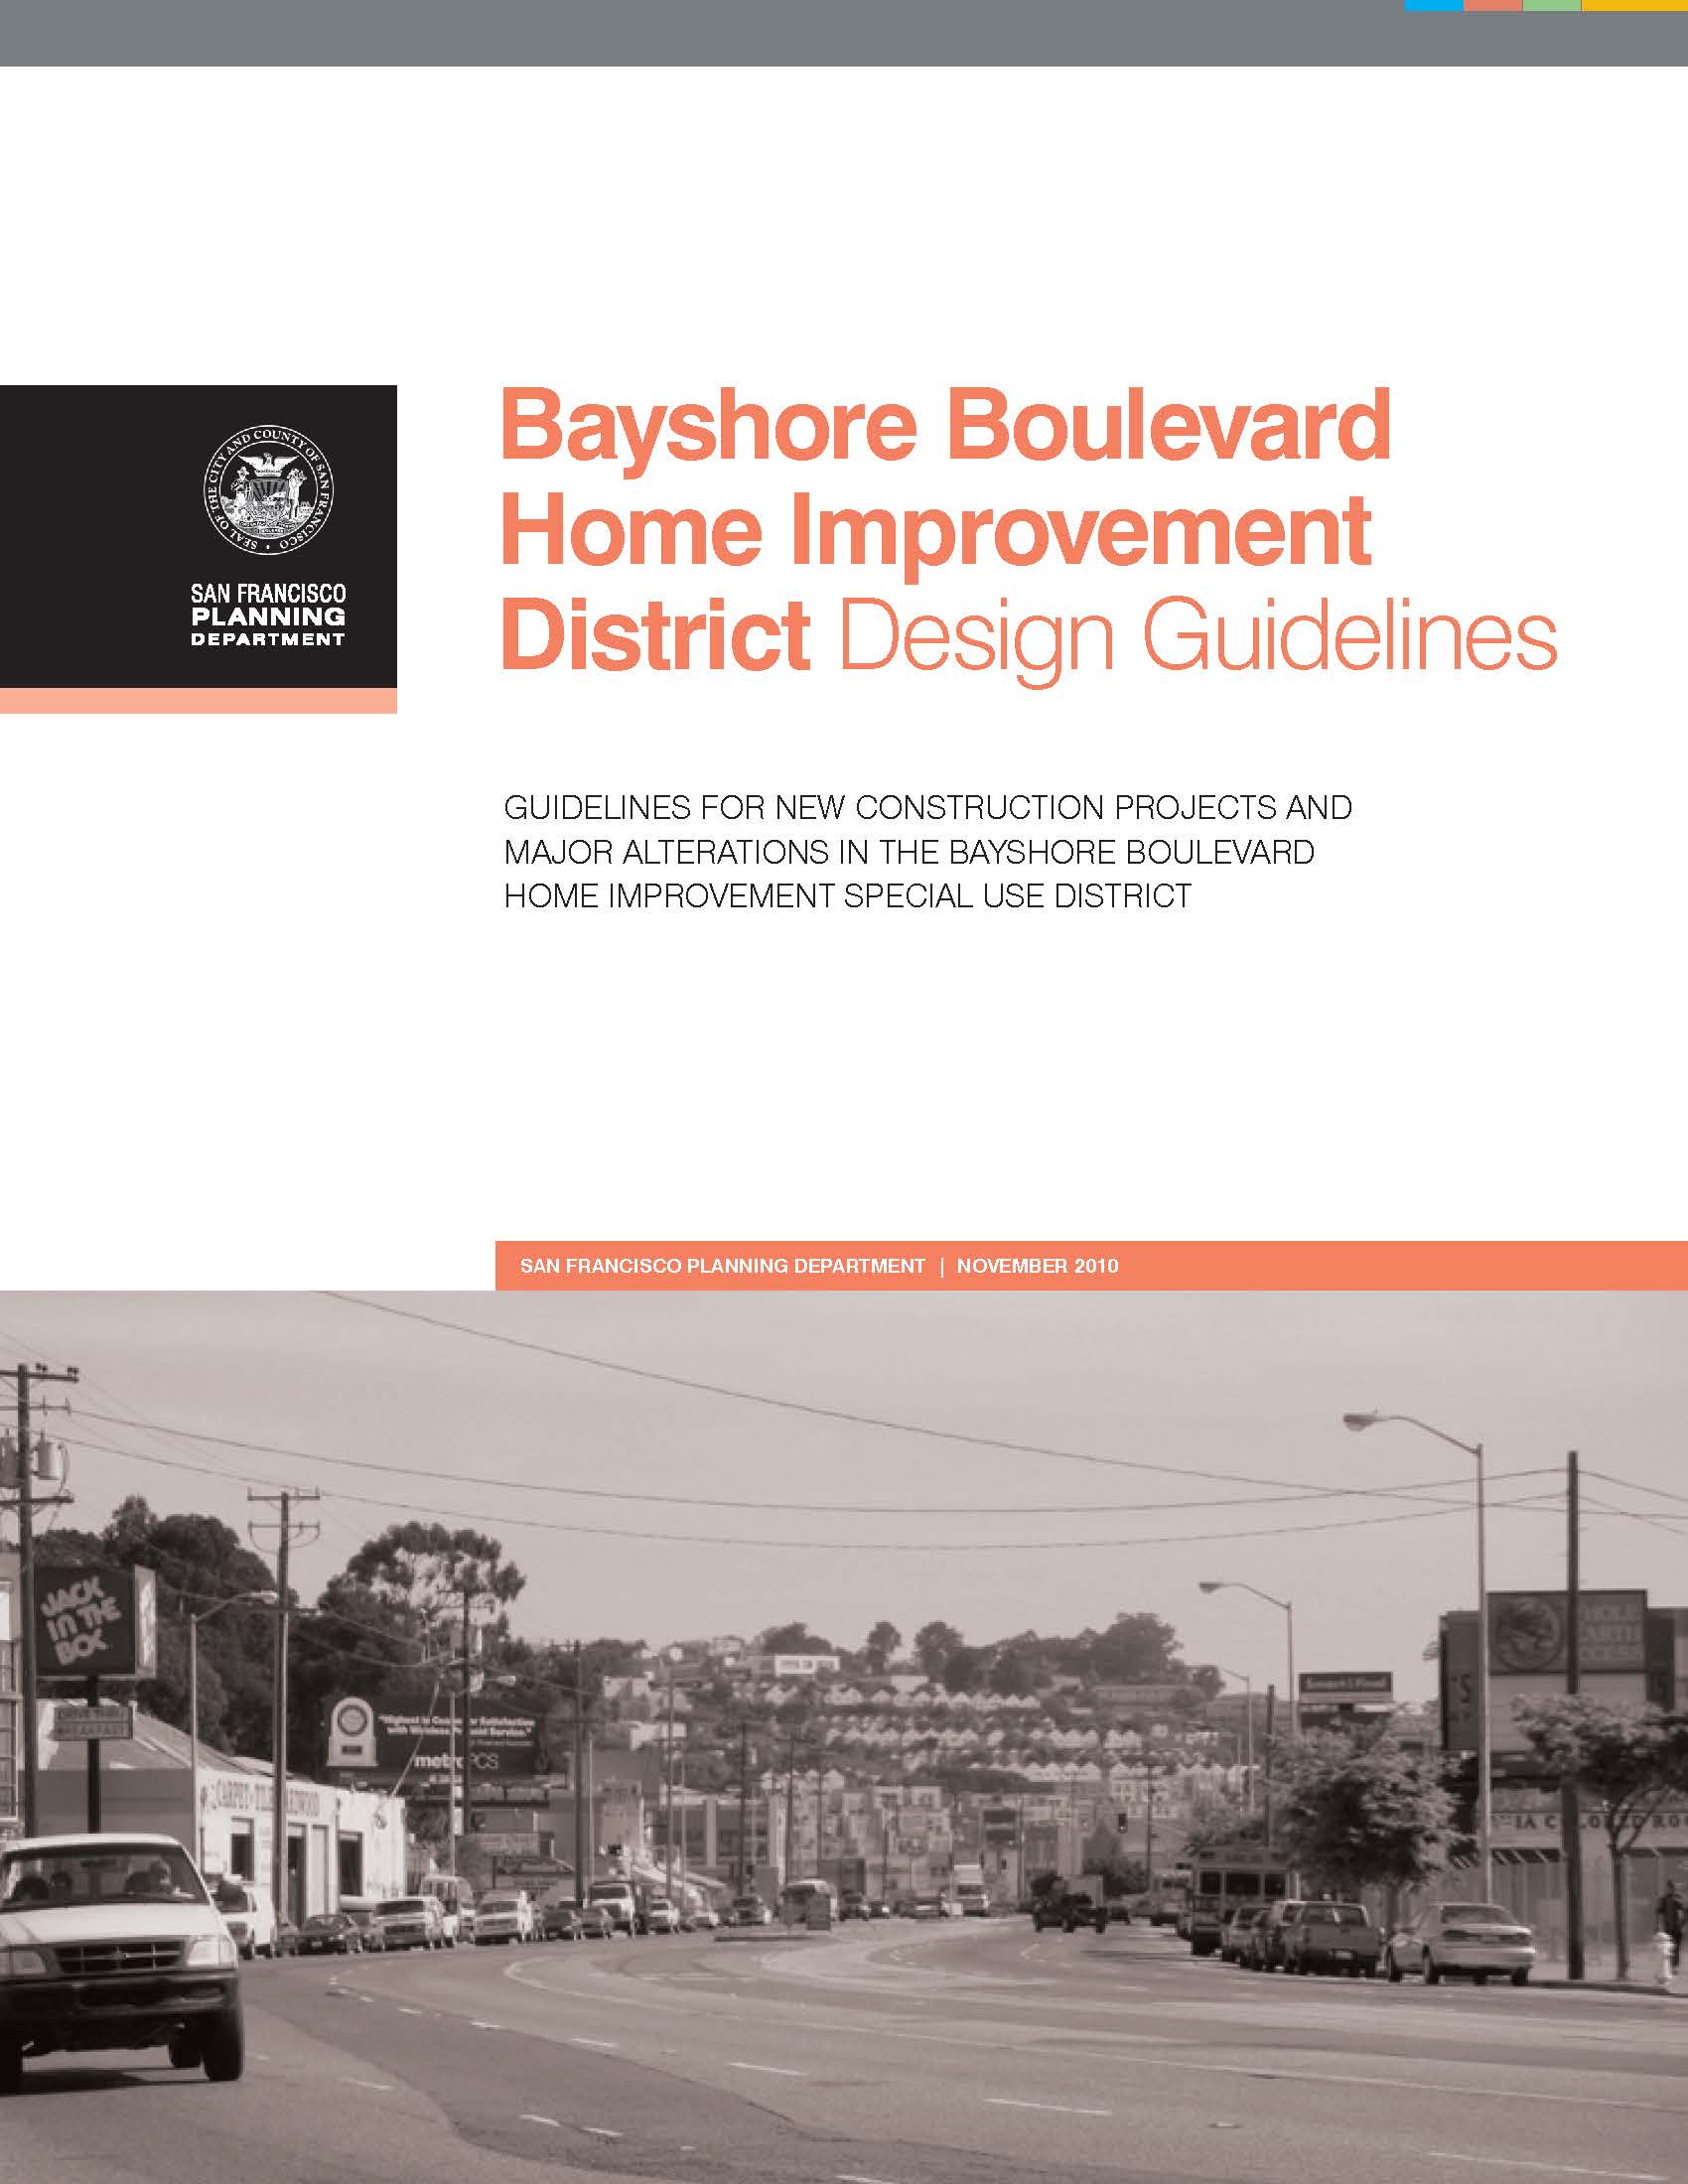 Cover Image for the Bayshore Blvd Home Improvement Design Guidelines